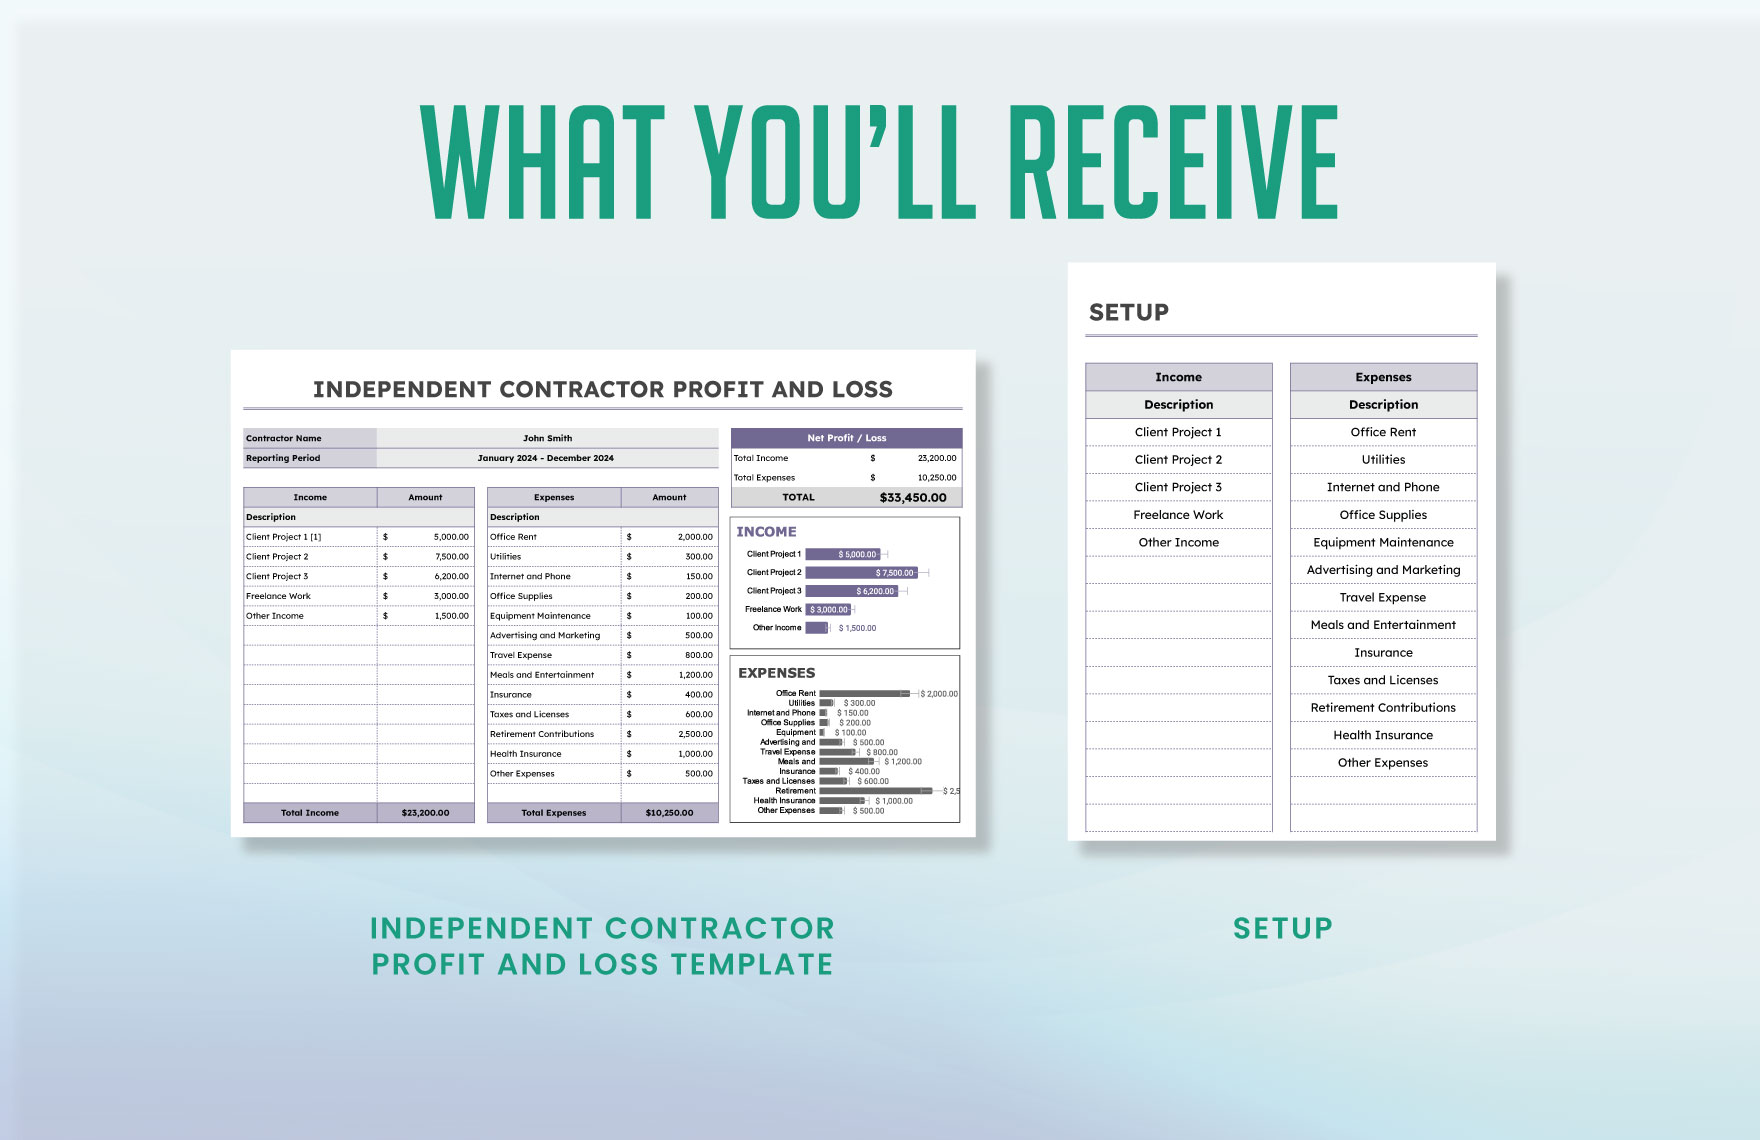 Independent Contractor Profit and Loss Template